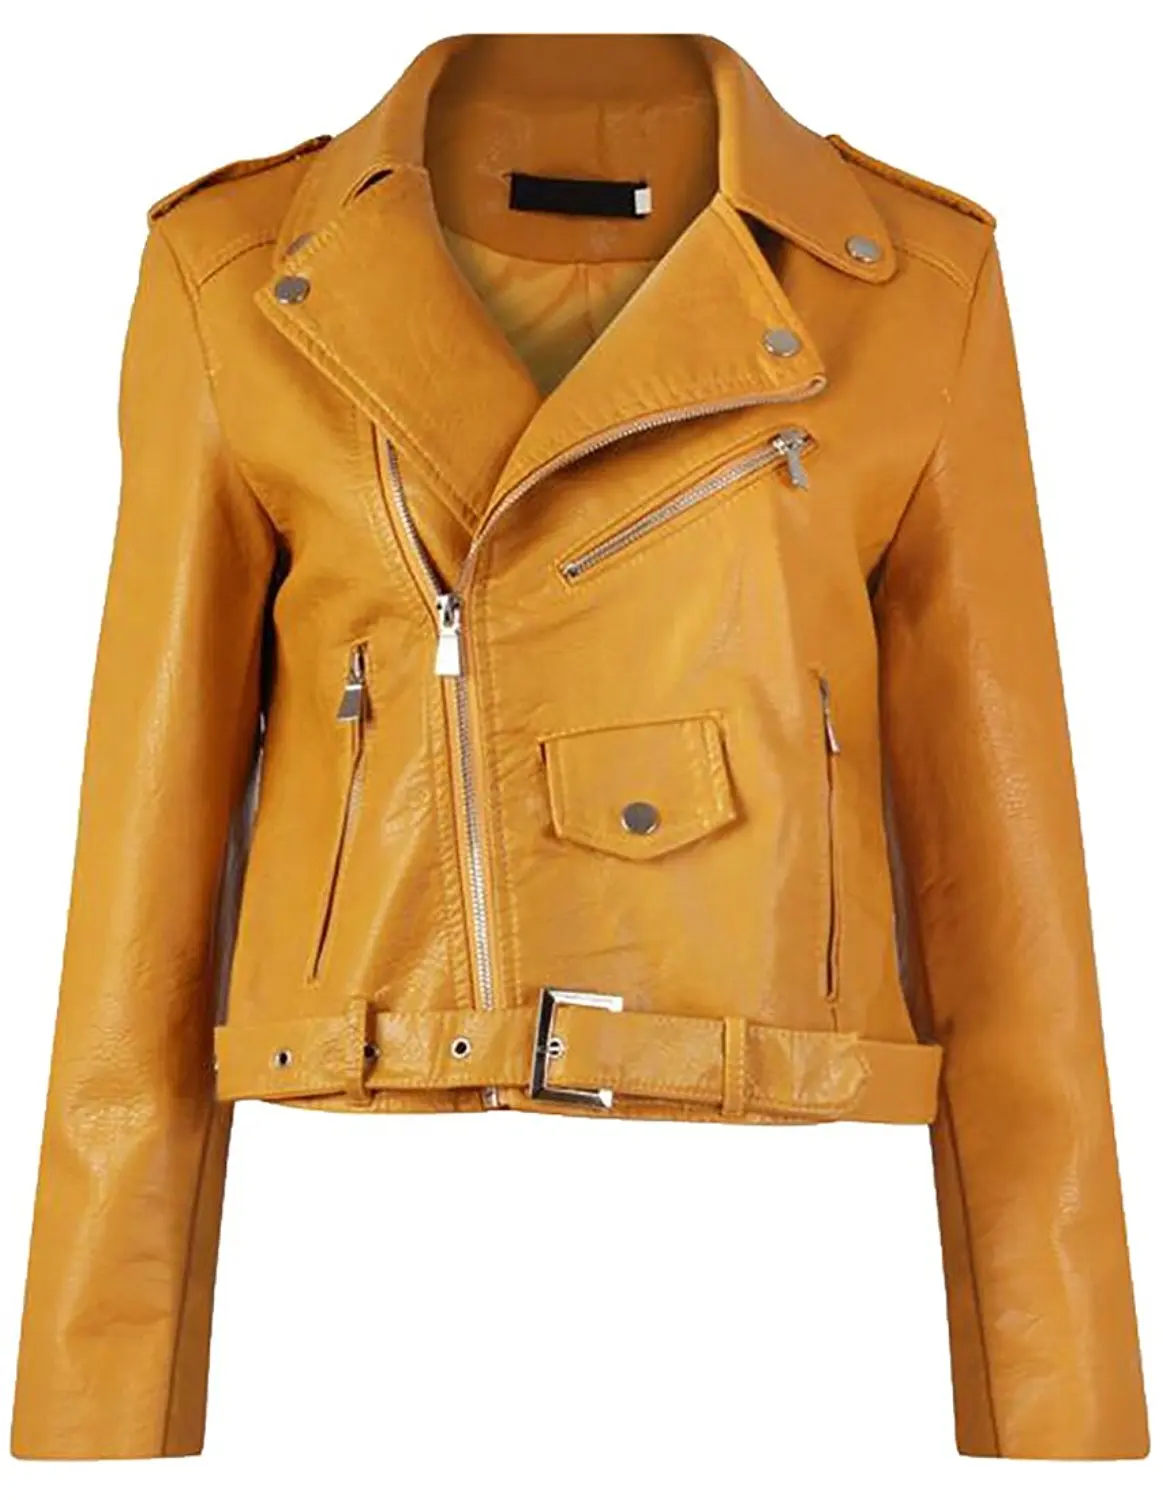 Cheap Yellow Motorcycle Jacket, find Yellow Motorcycle Jacket deals on ...